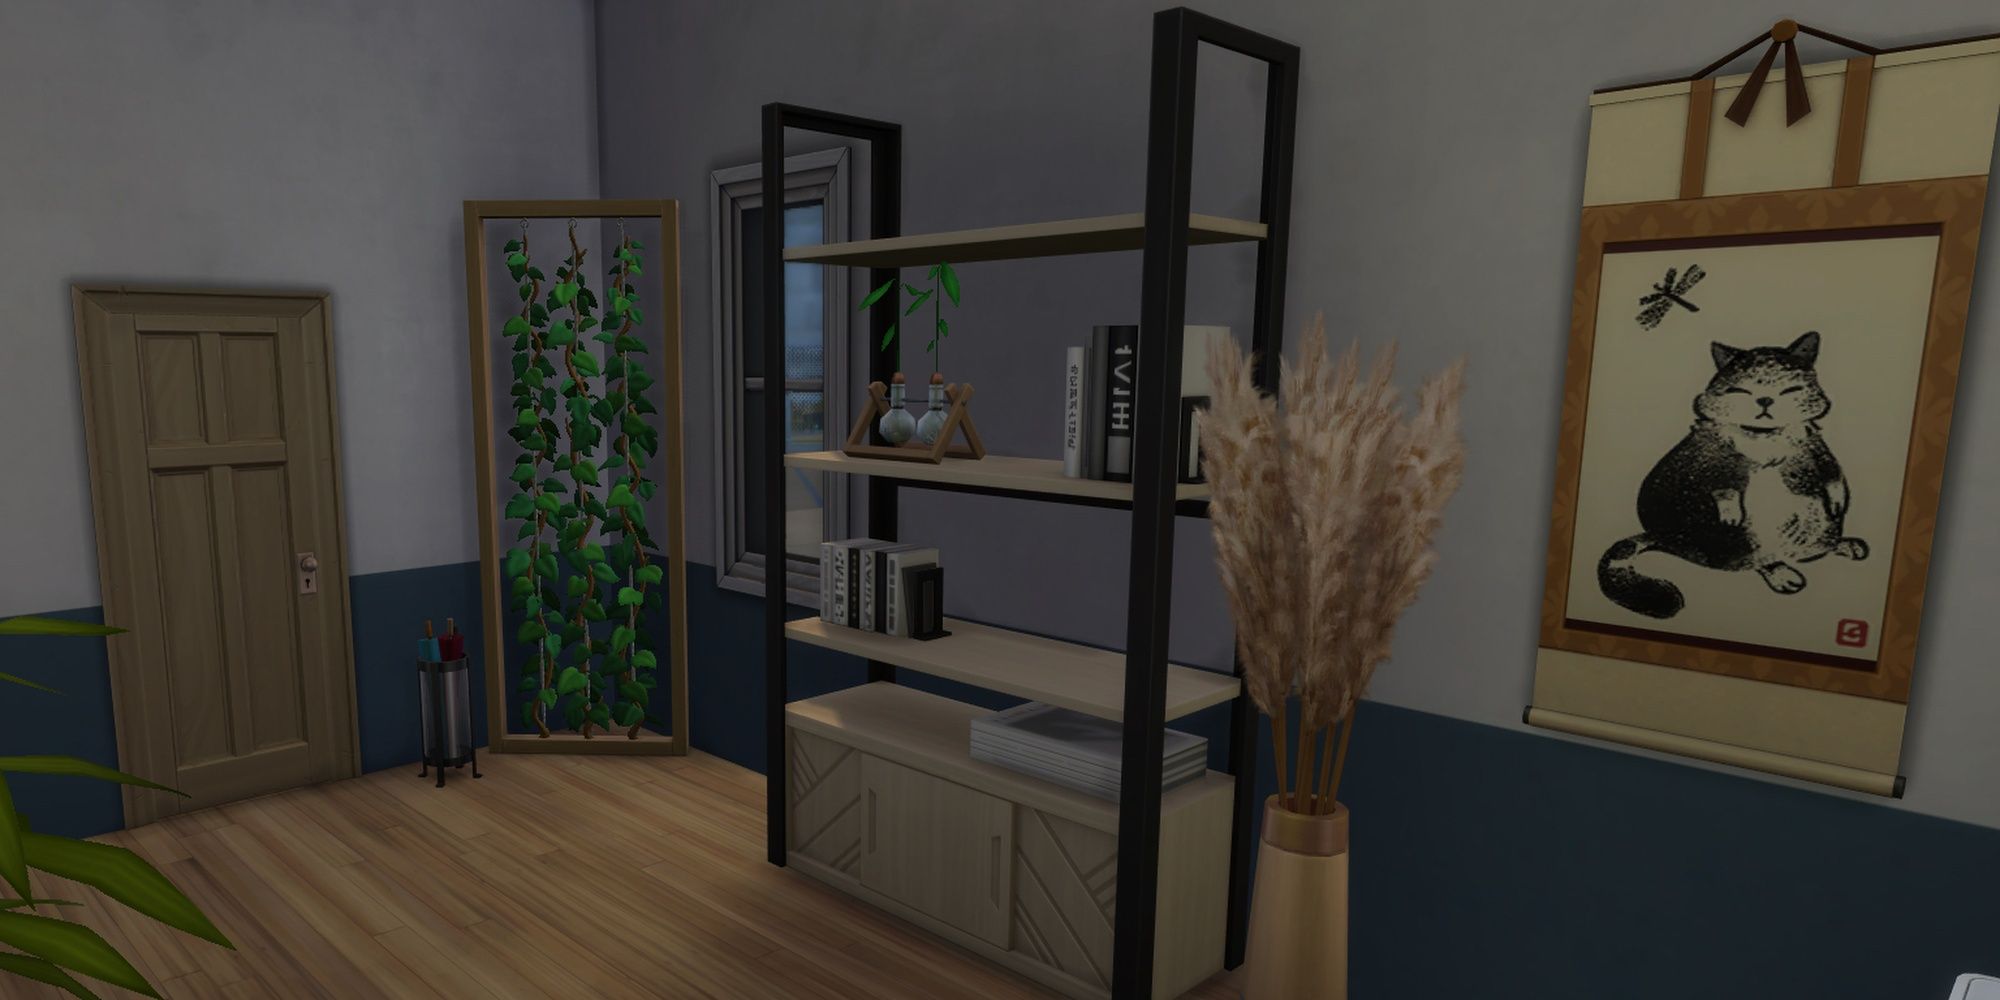 A Sims 4 bookshelf made of light wood framed in dark metal, holding books and small plants.